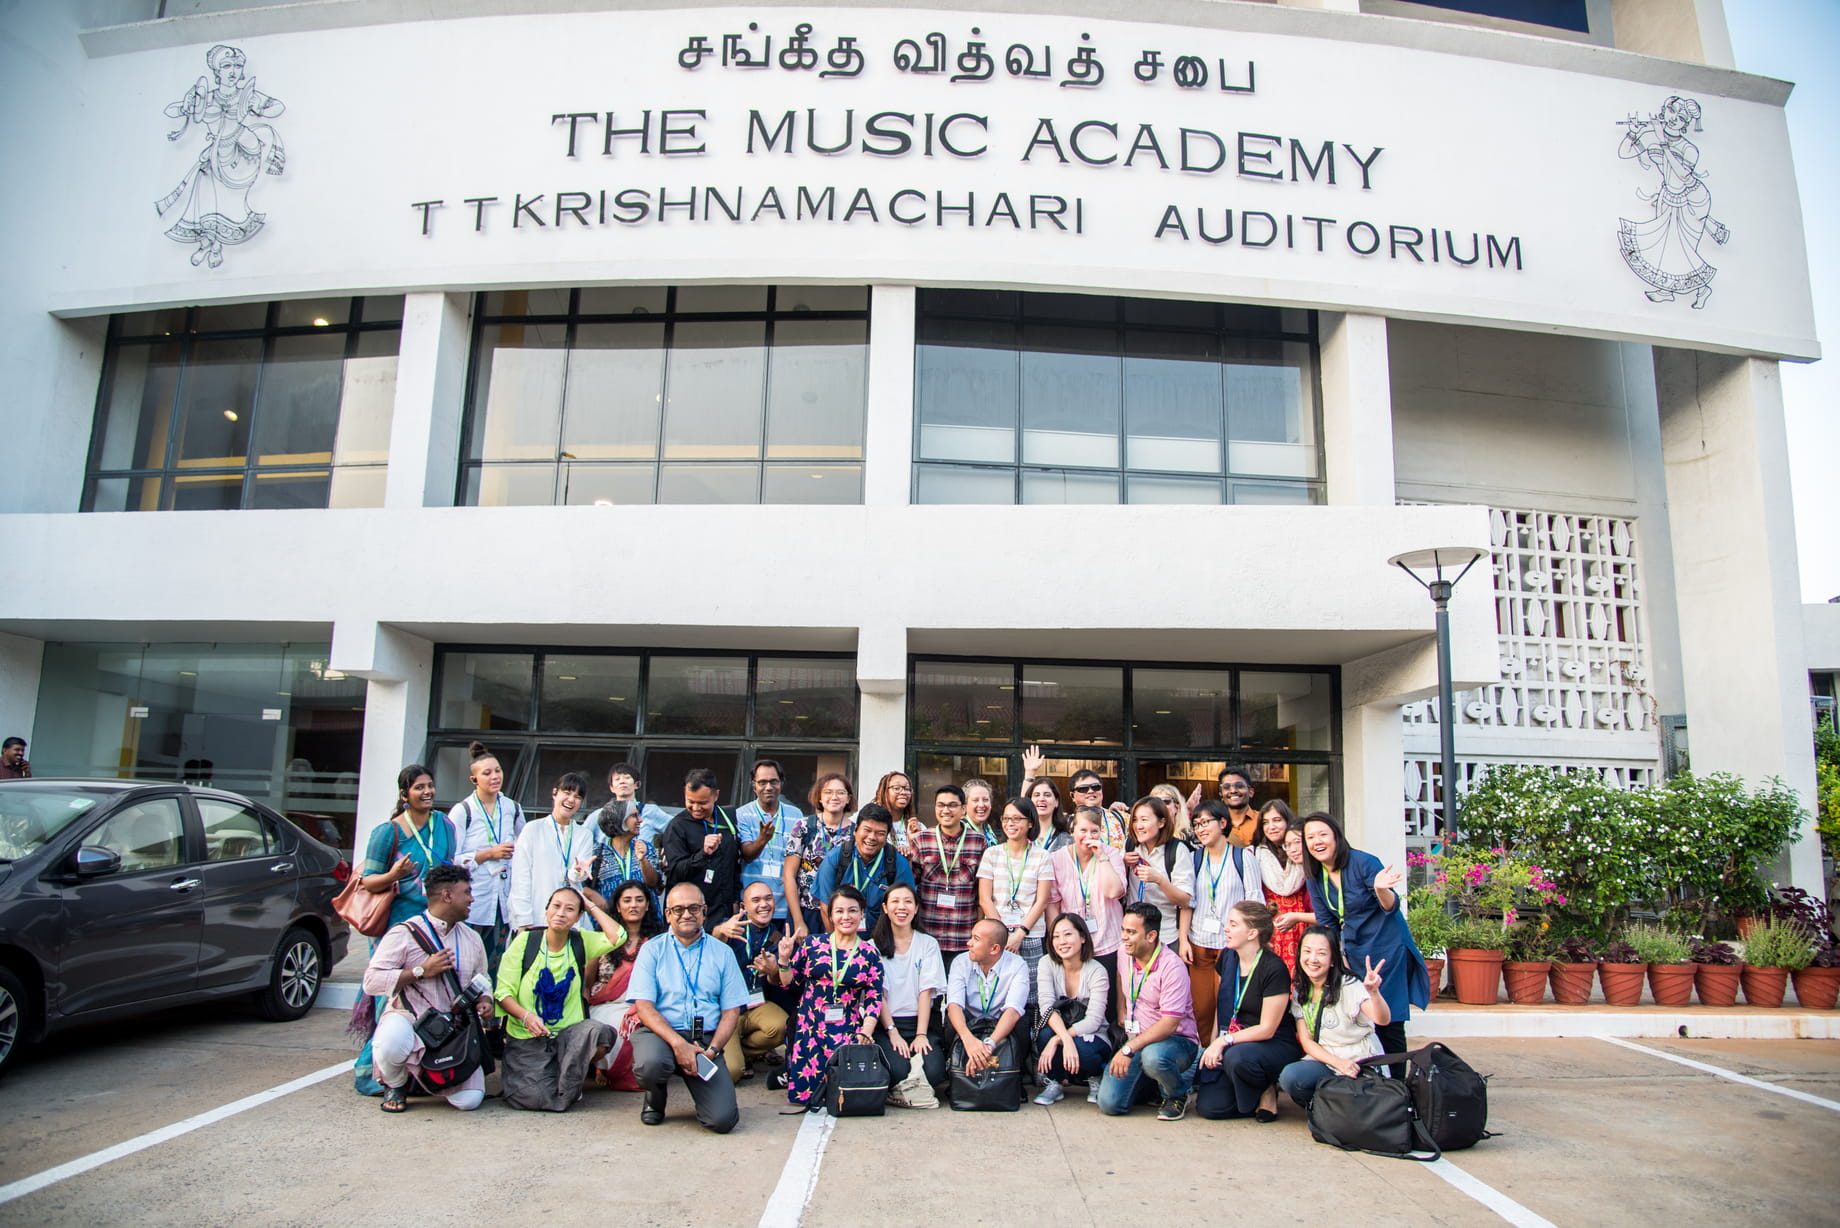 Fellows kicked-off the Chennai Exchange Programme with an introduction on Chennai’s culture and heritage through a learning journey to the Music Academy